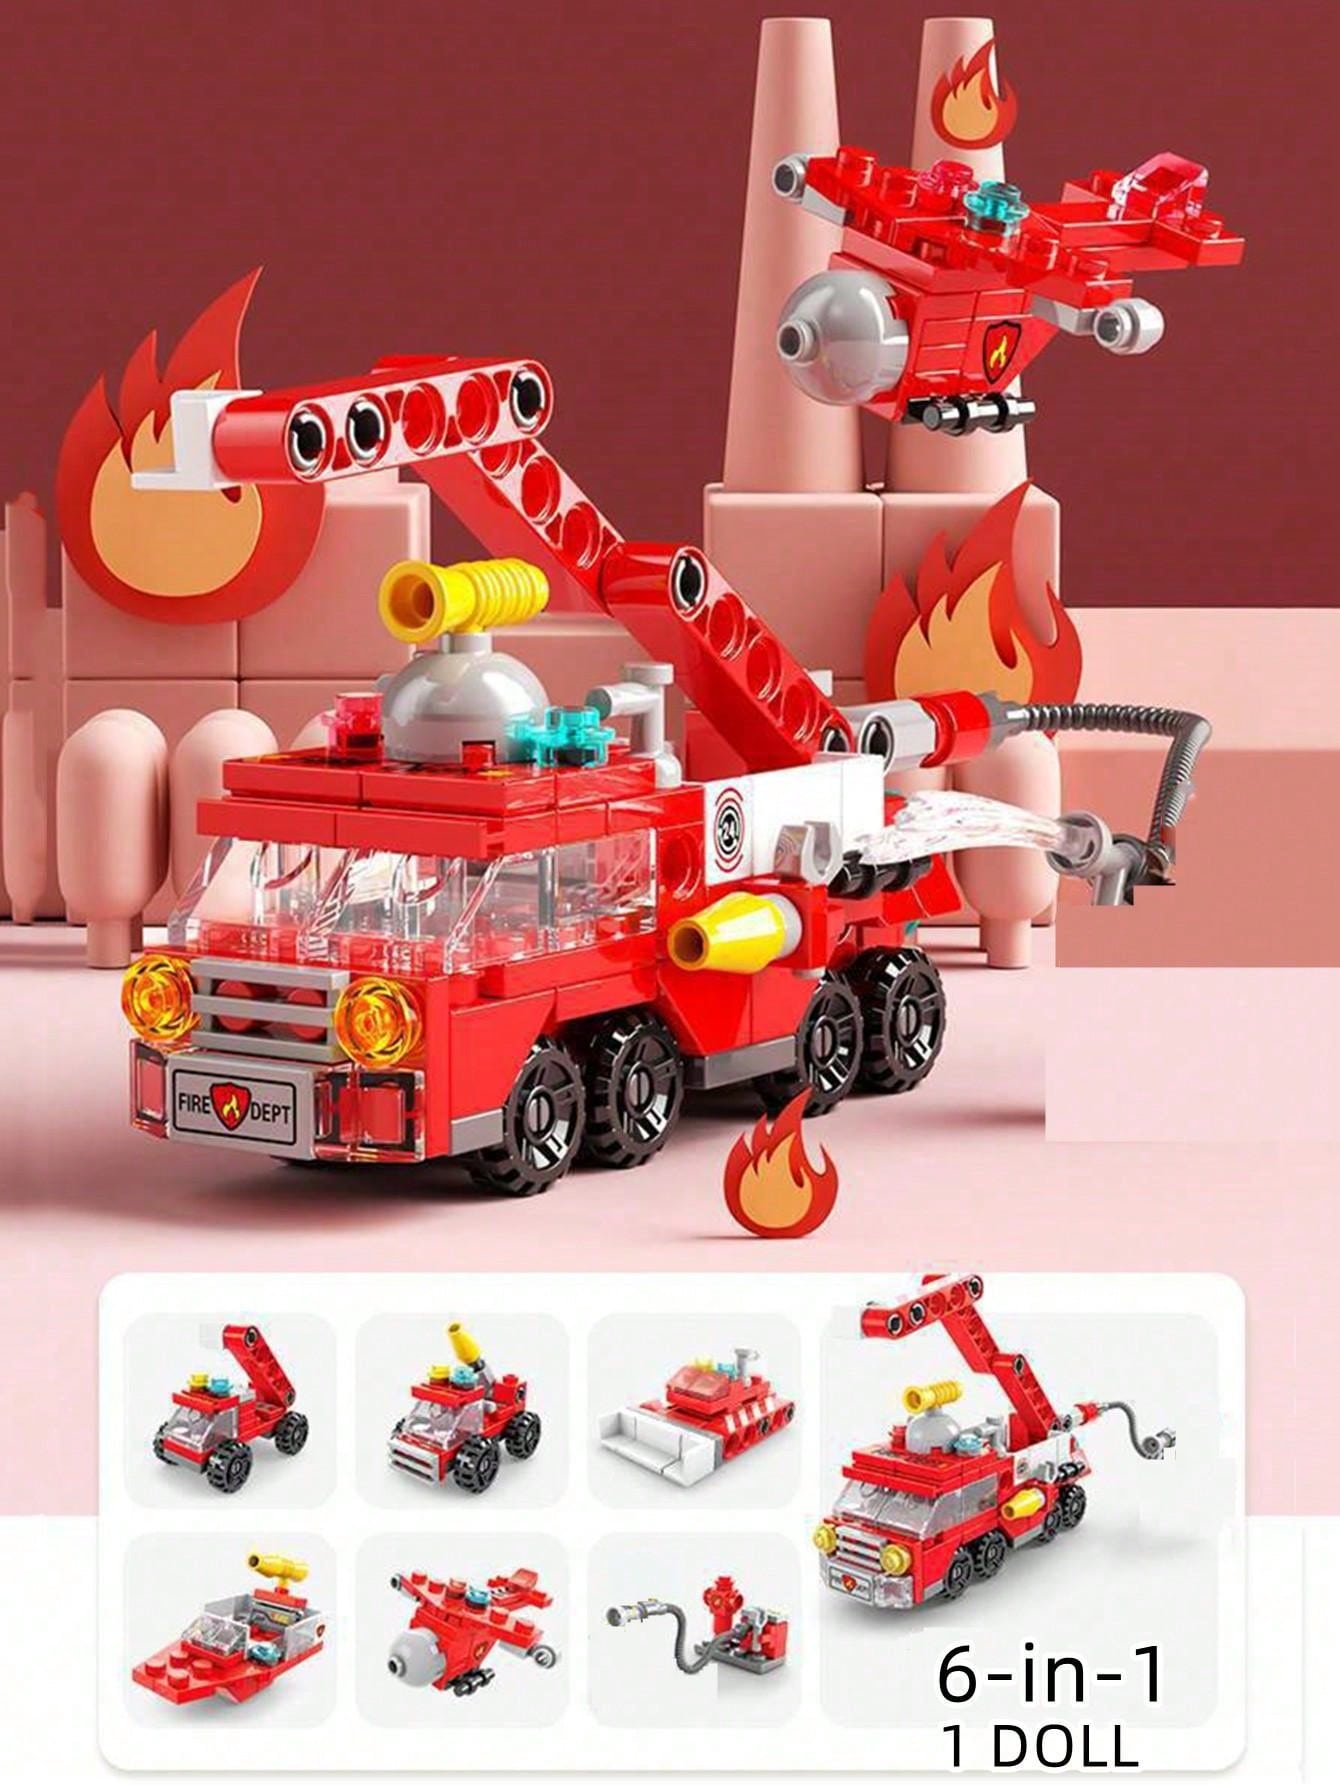 142pcs Small Particle Building Blocks 6-in-1 Set With Firefighters, Police, And Tank Theme For Children's Intelligence Development And Birthday Gifts